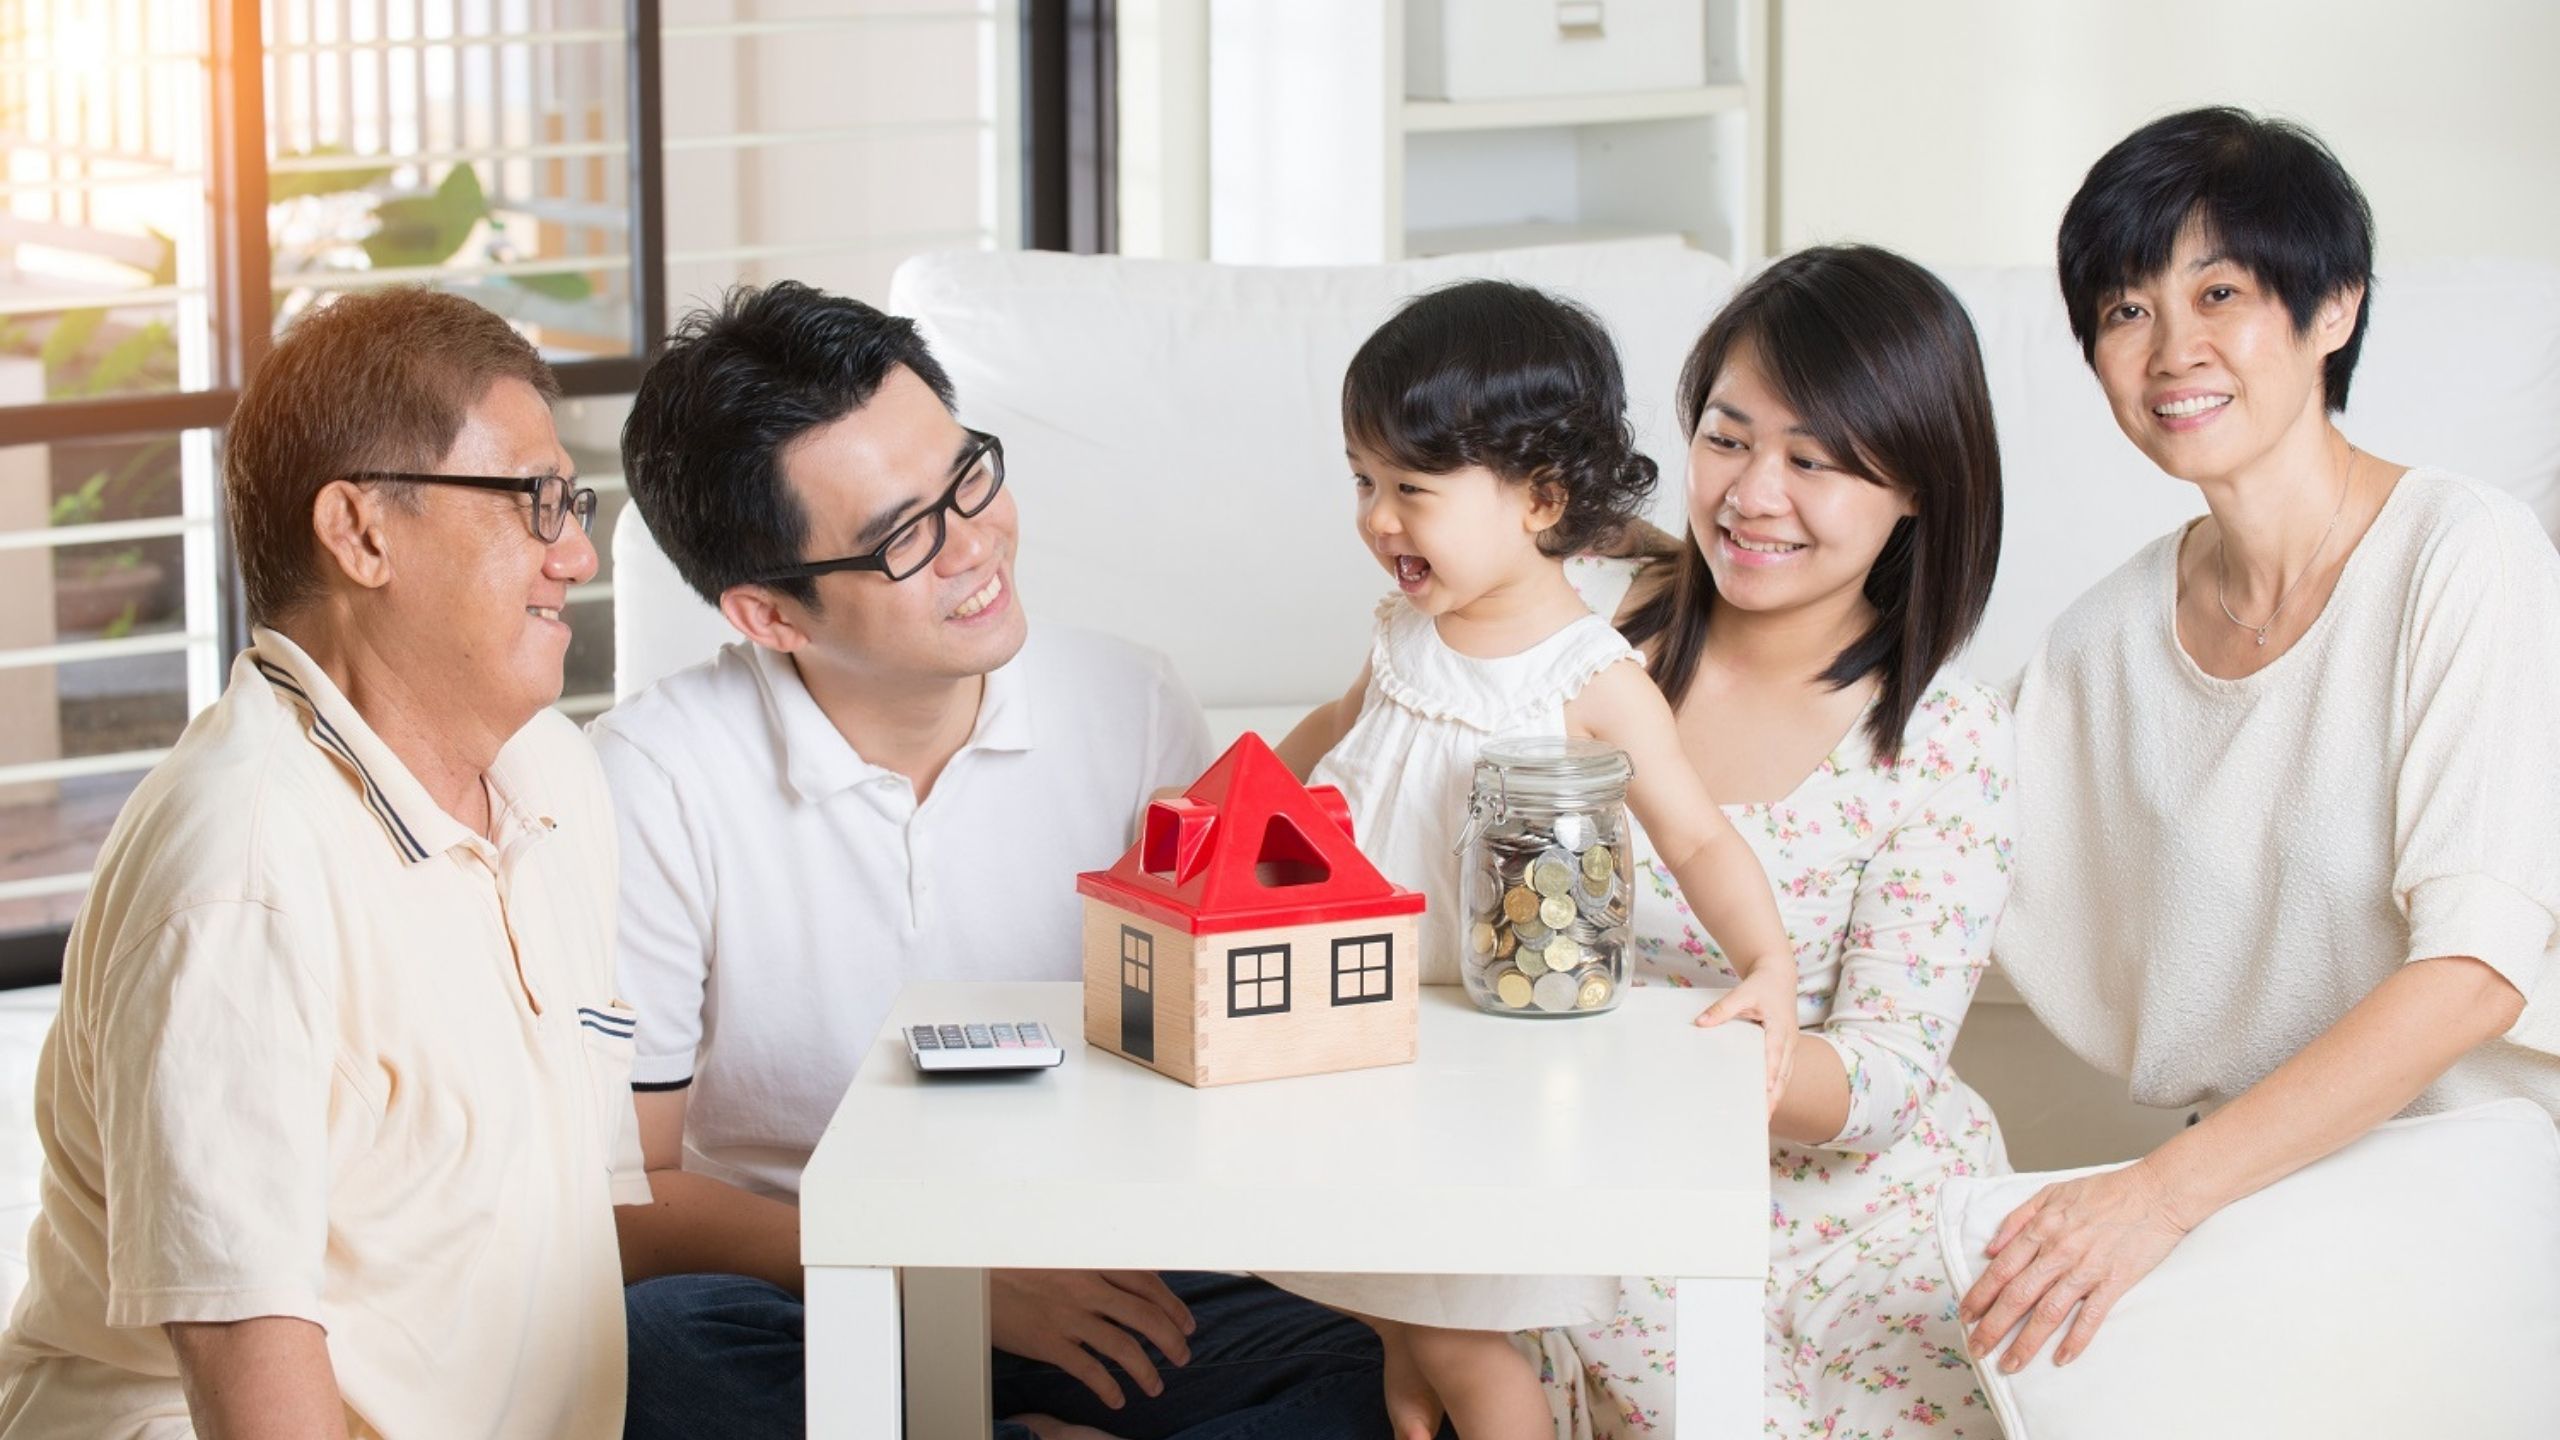 Three generation family smiling together with small toy house and jar of coins on table